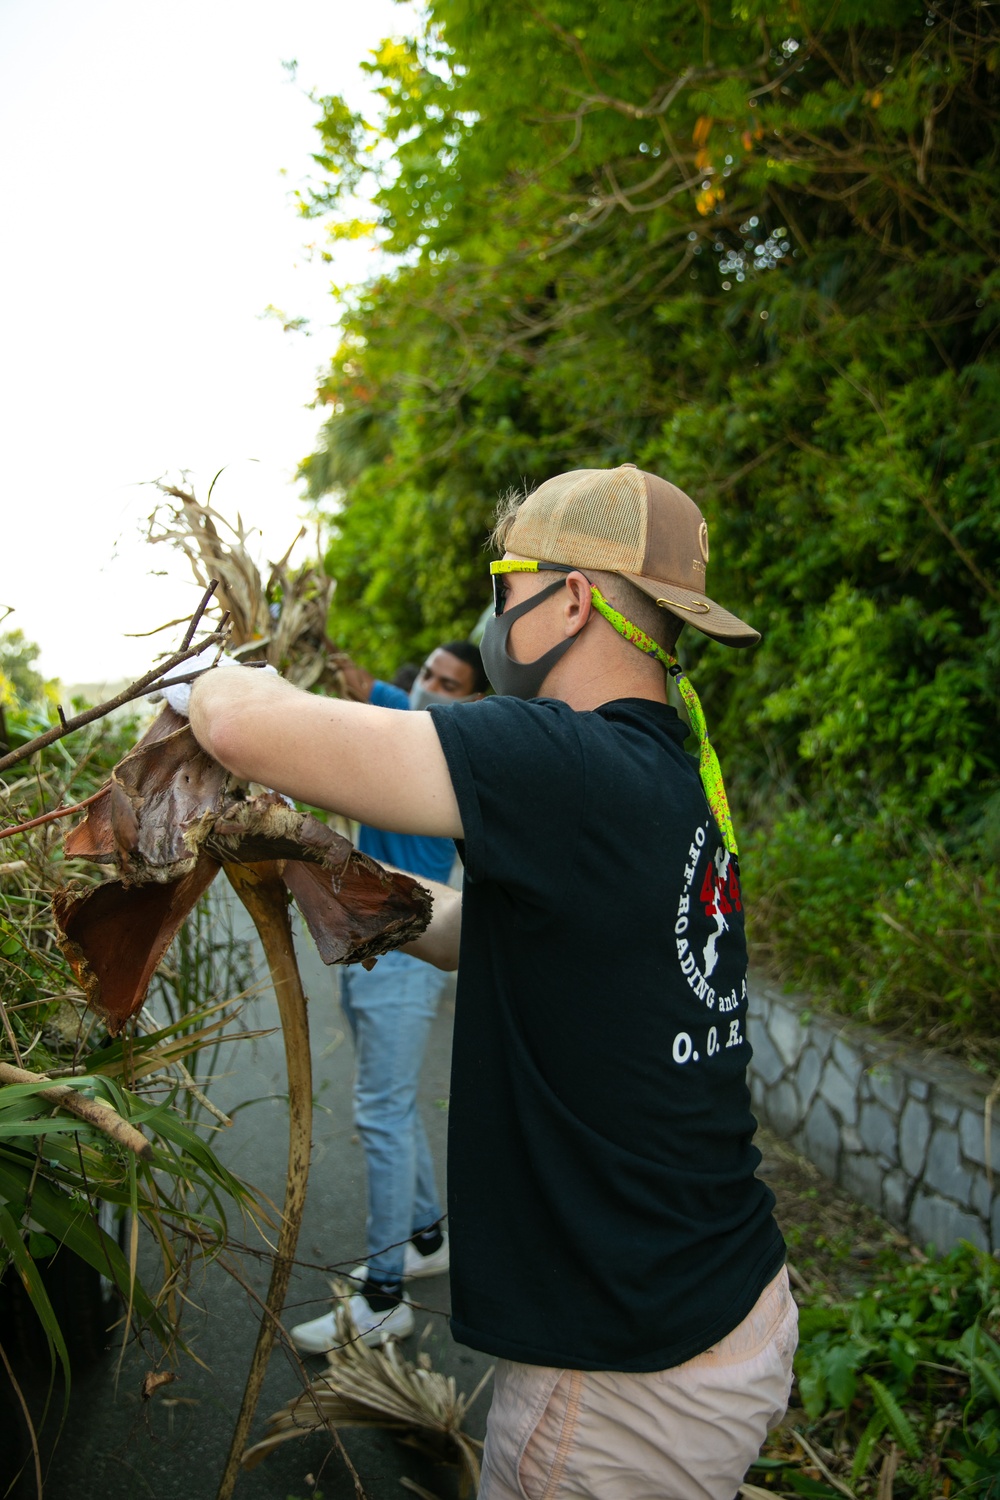 Marines with 9th Engineer Support Battalion trade in rifles for rakes for garden clean up